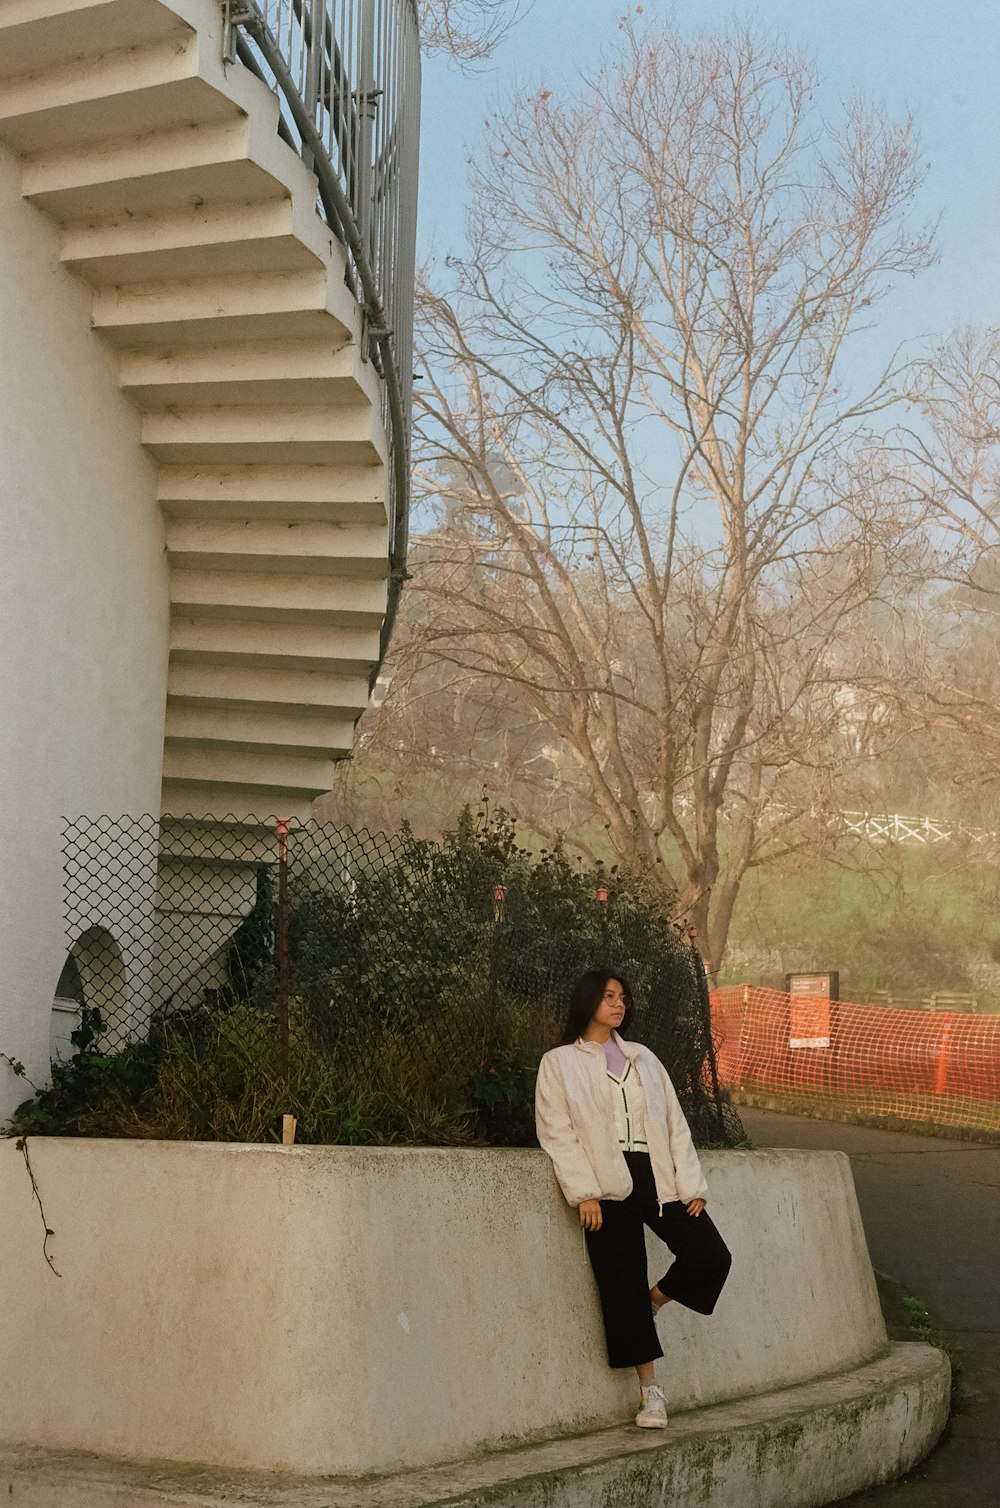 a man sitting on a wall next to a spiral staircase